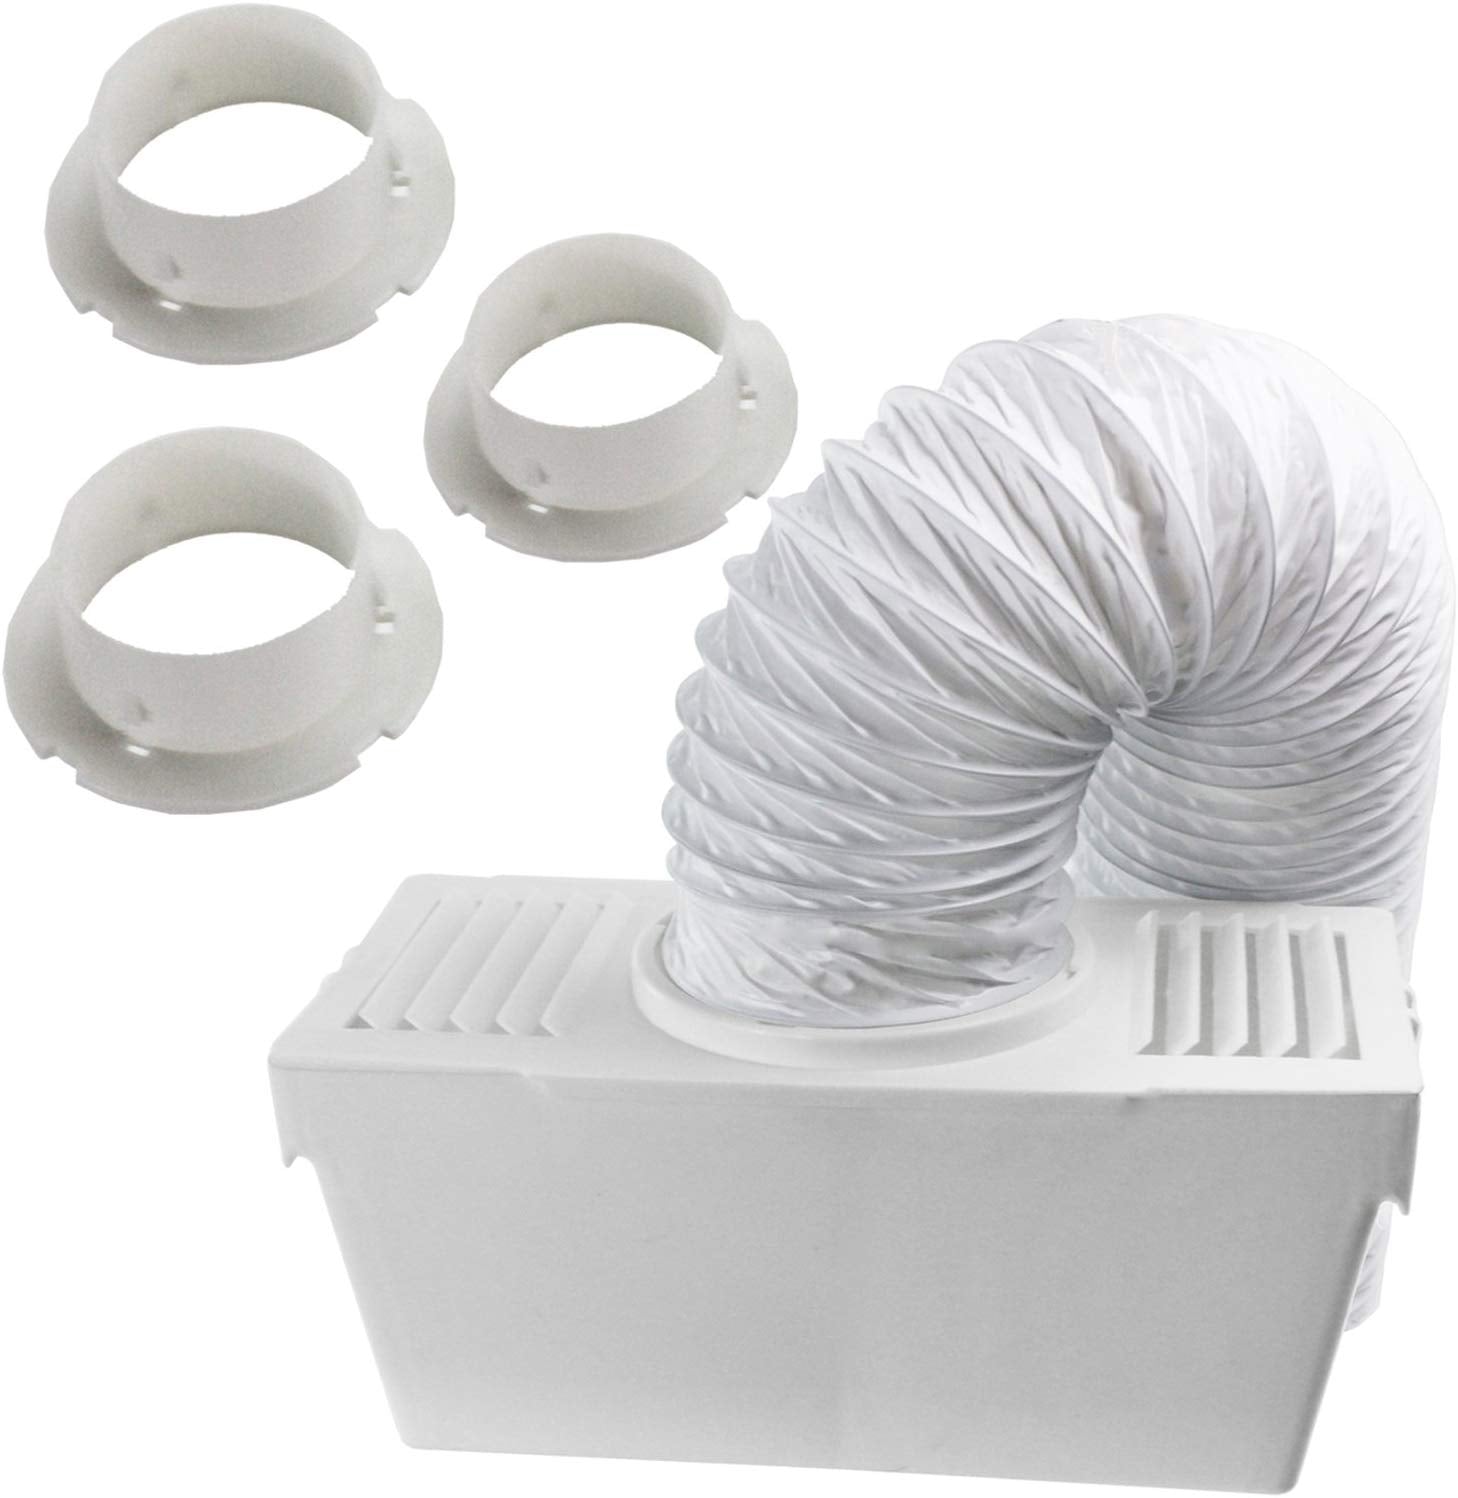 Vent Hose Condenser Kit with 3 x Adapters for Zanussi Tumble Dryer (1.2m)